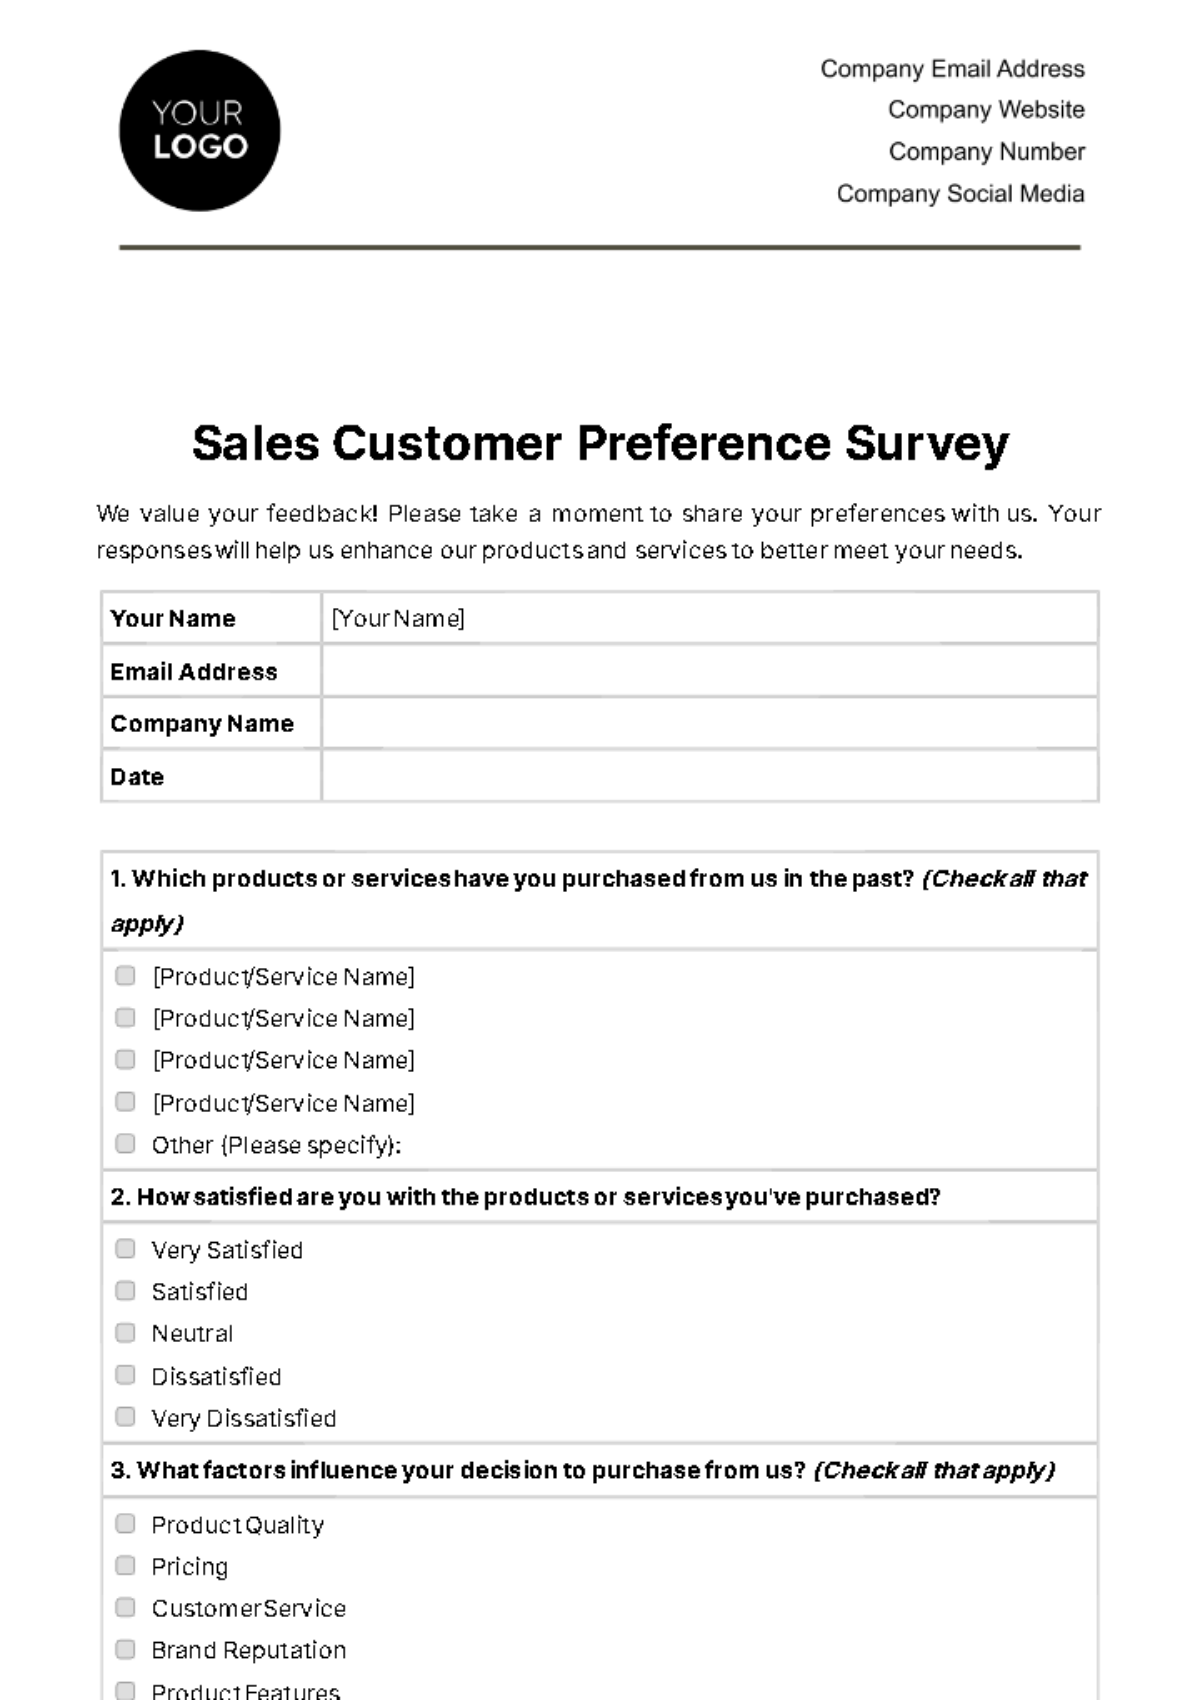 Free Sales Customer Preference Survey Template